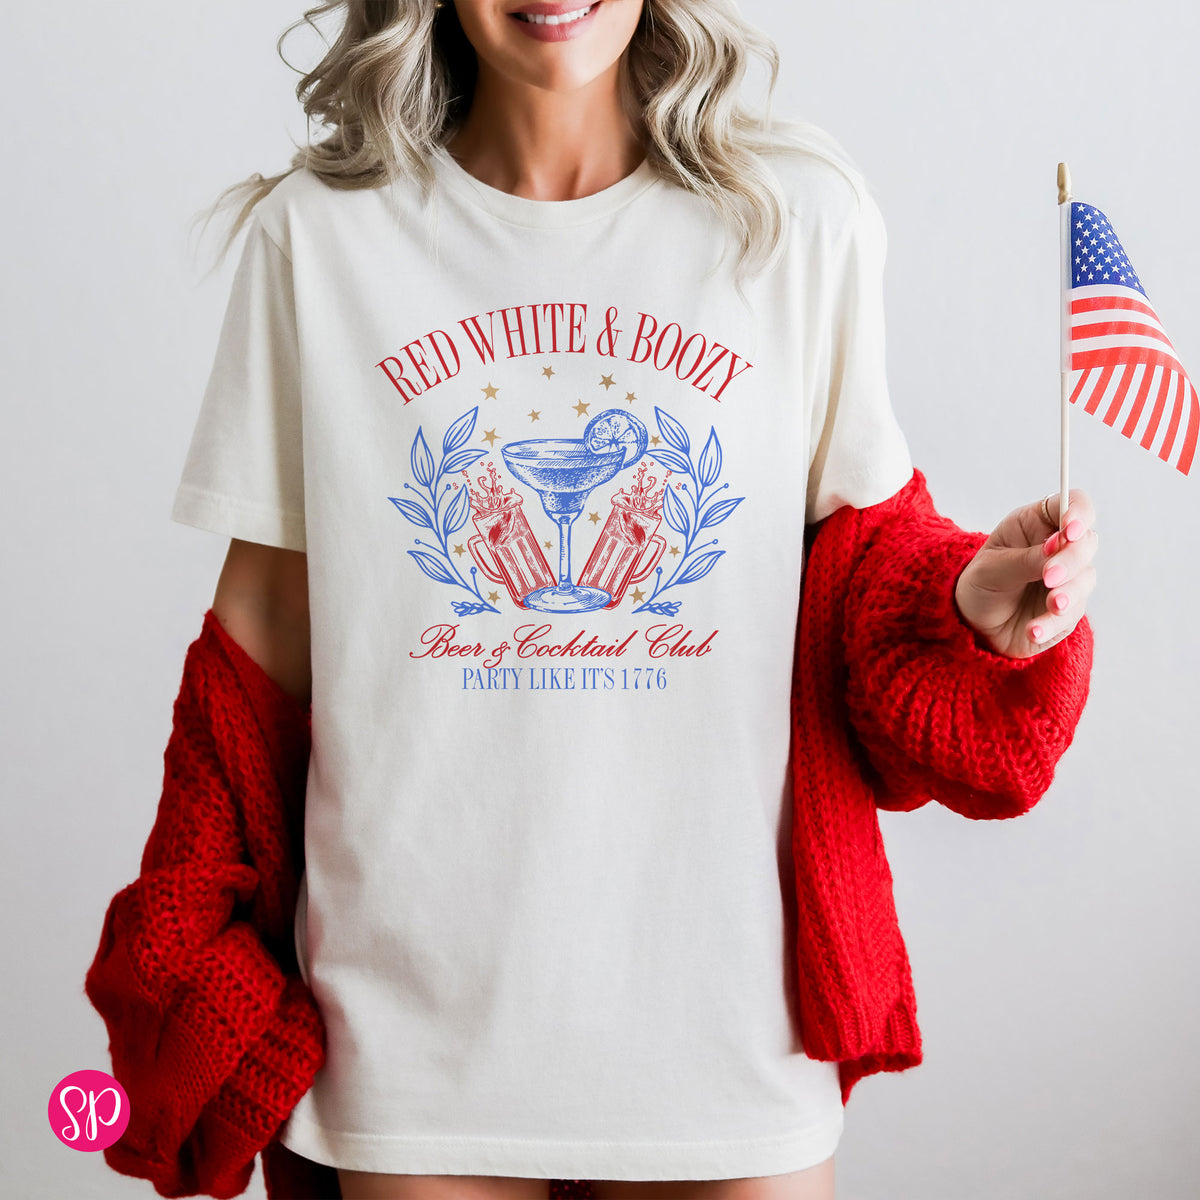 Red White & Boozy, Beer & Cocktail Club Unisex T-Shirt